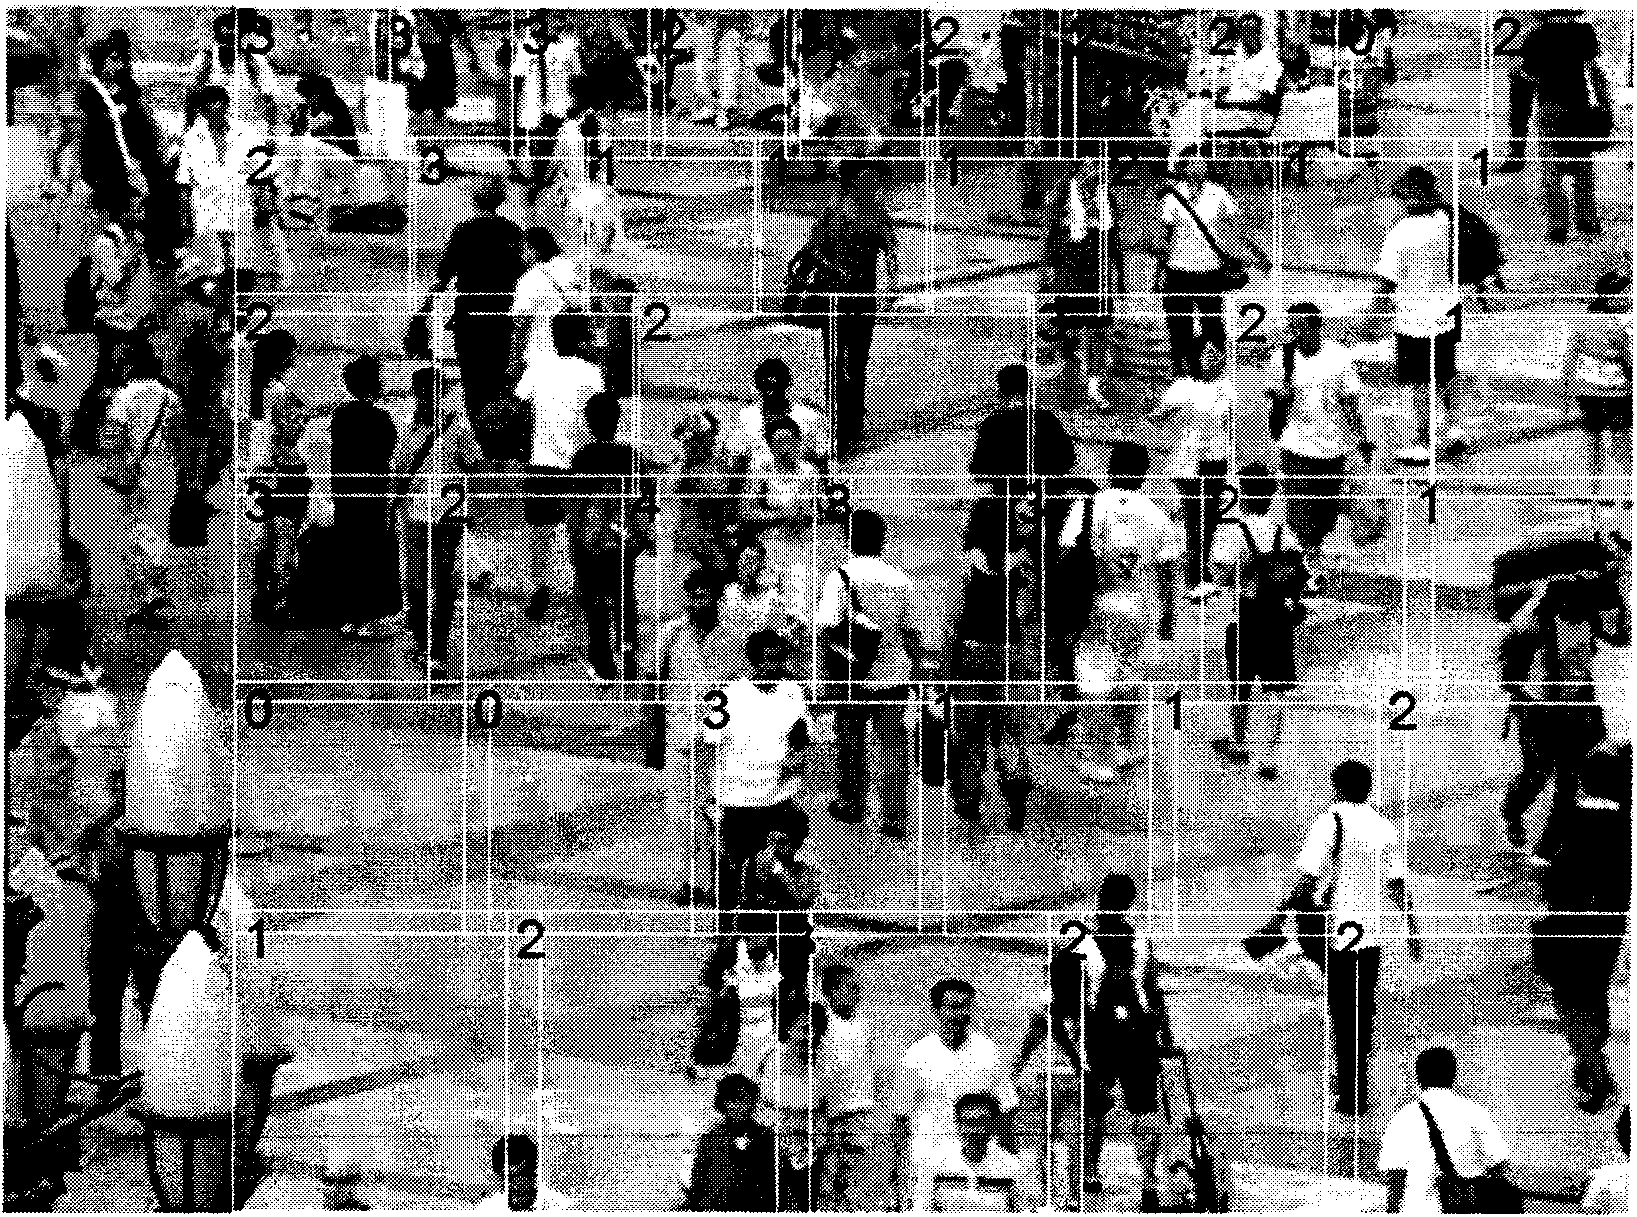 Method and system for judging crowd density in image